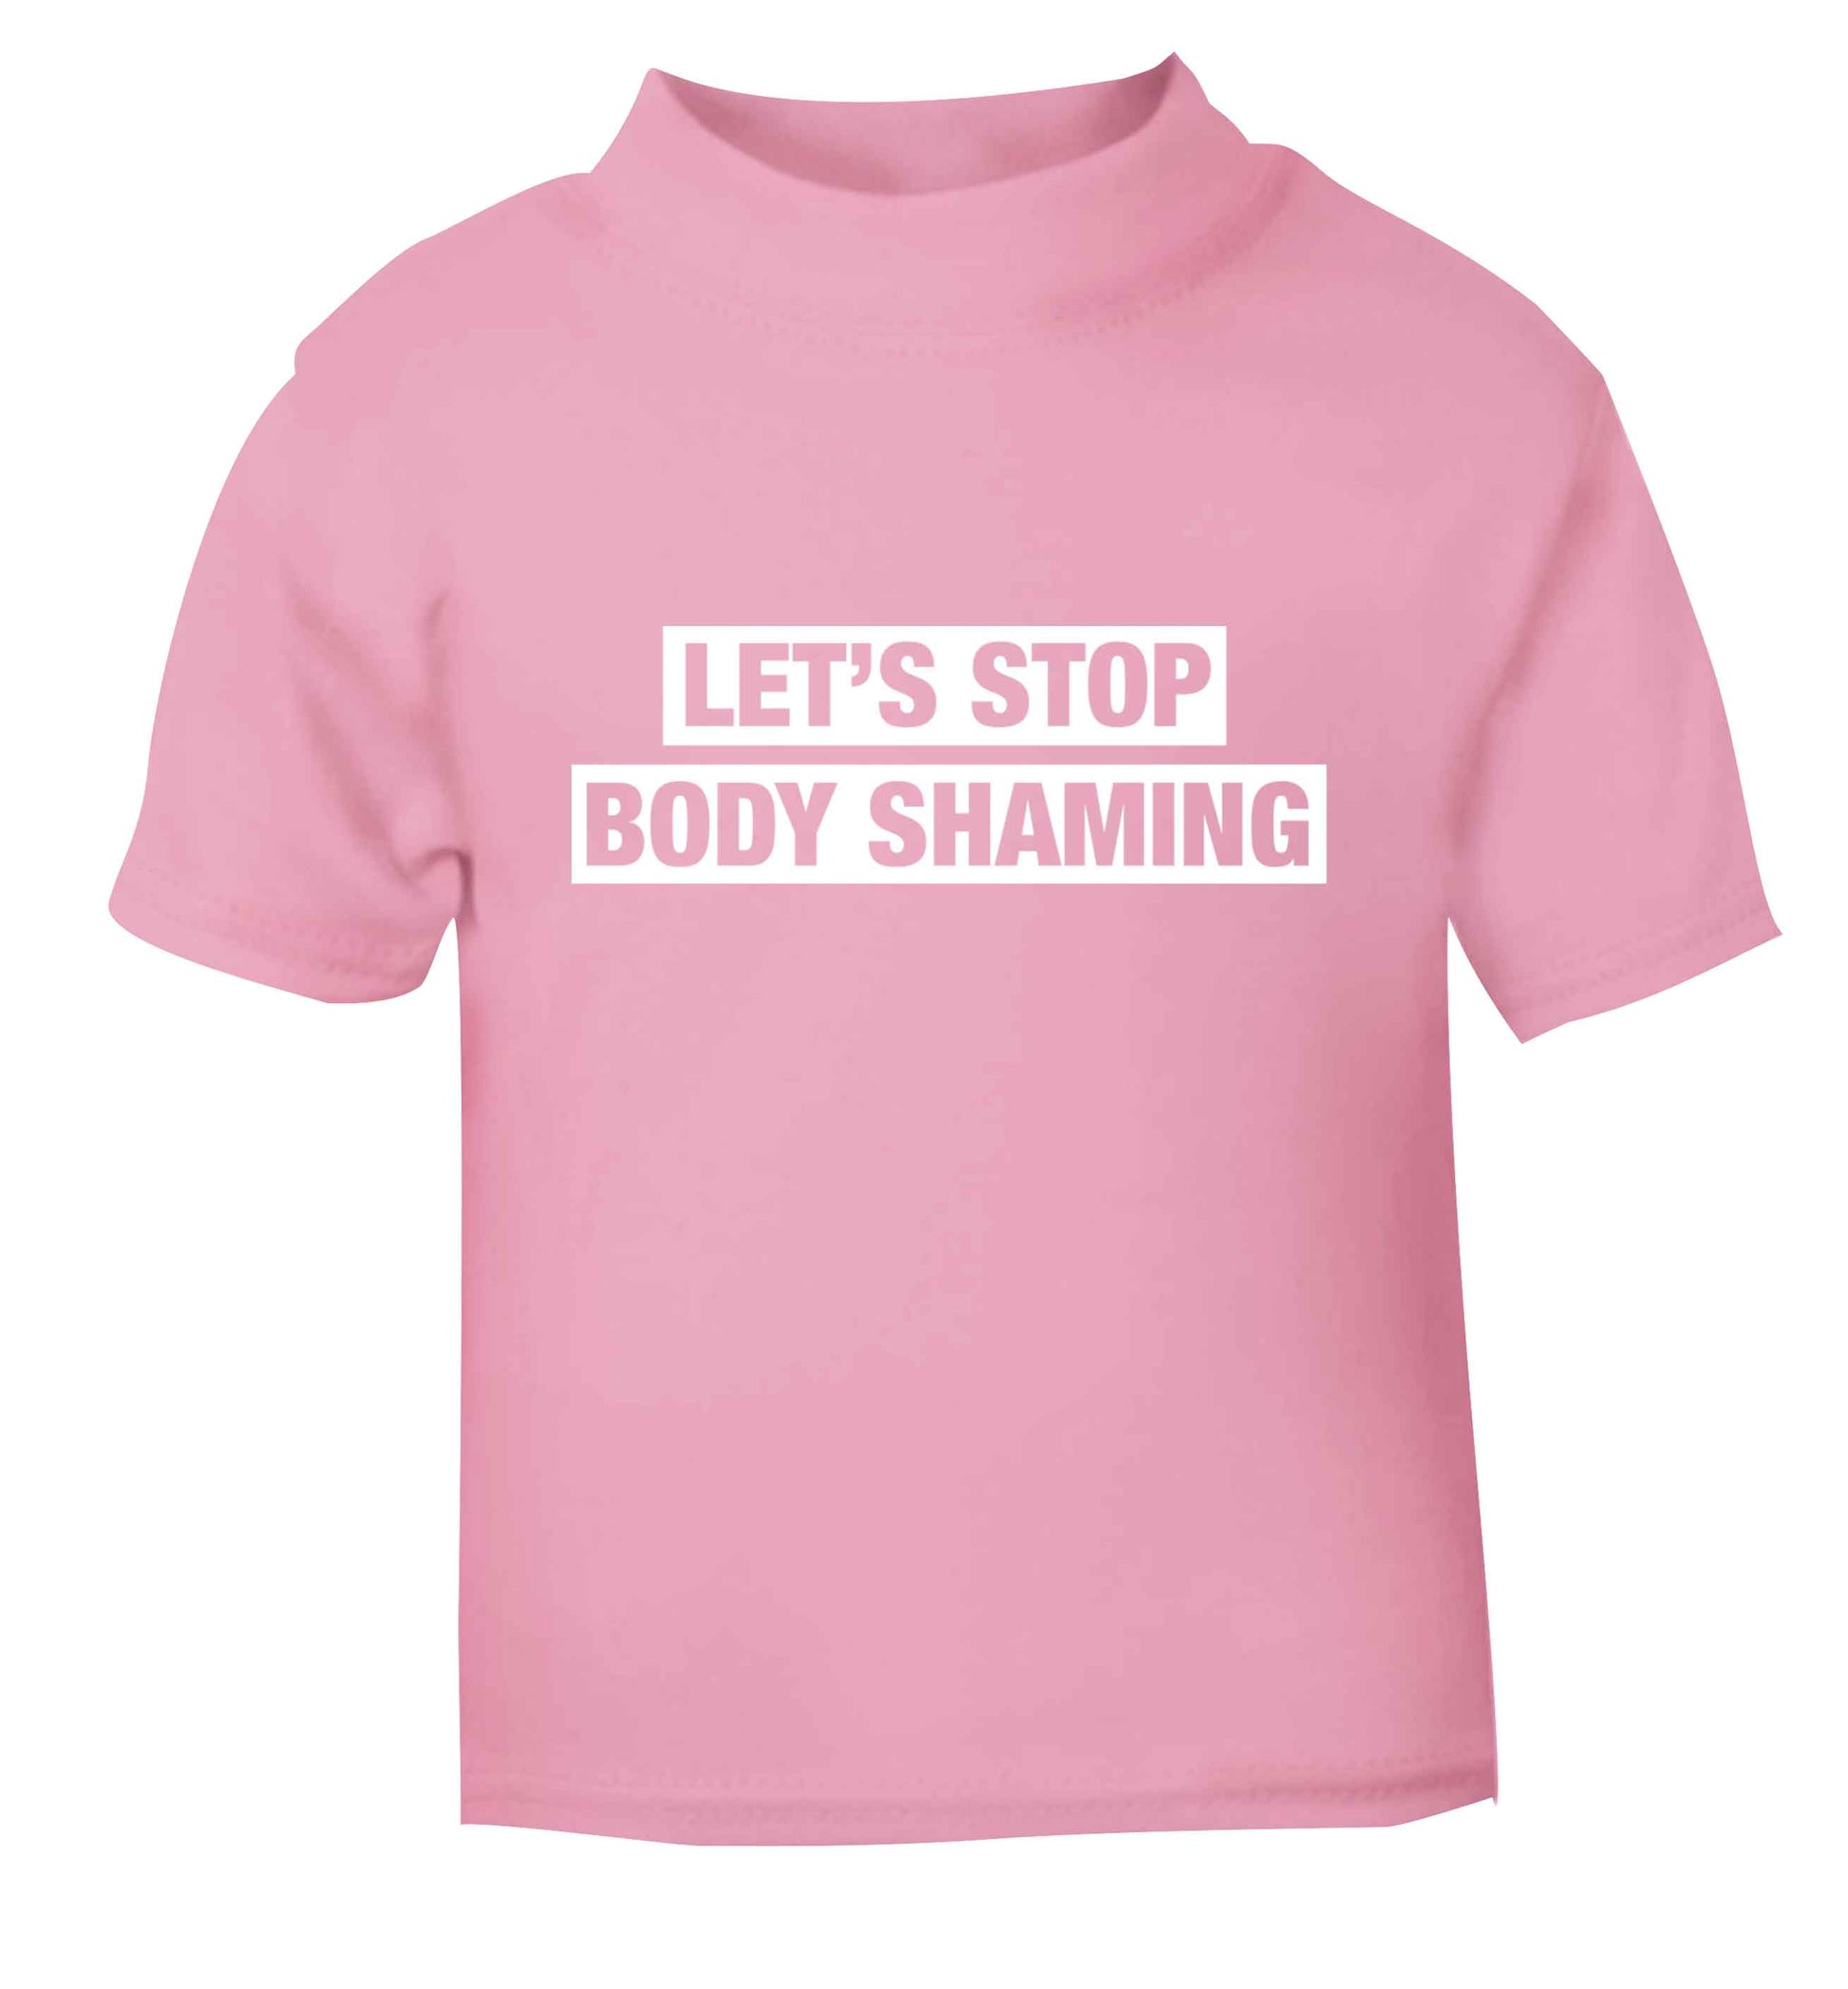 Let's stop body shaming light pink baby toddler Tshirt 2 Years